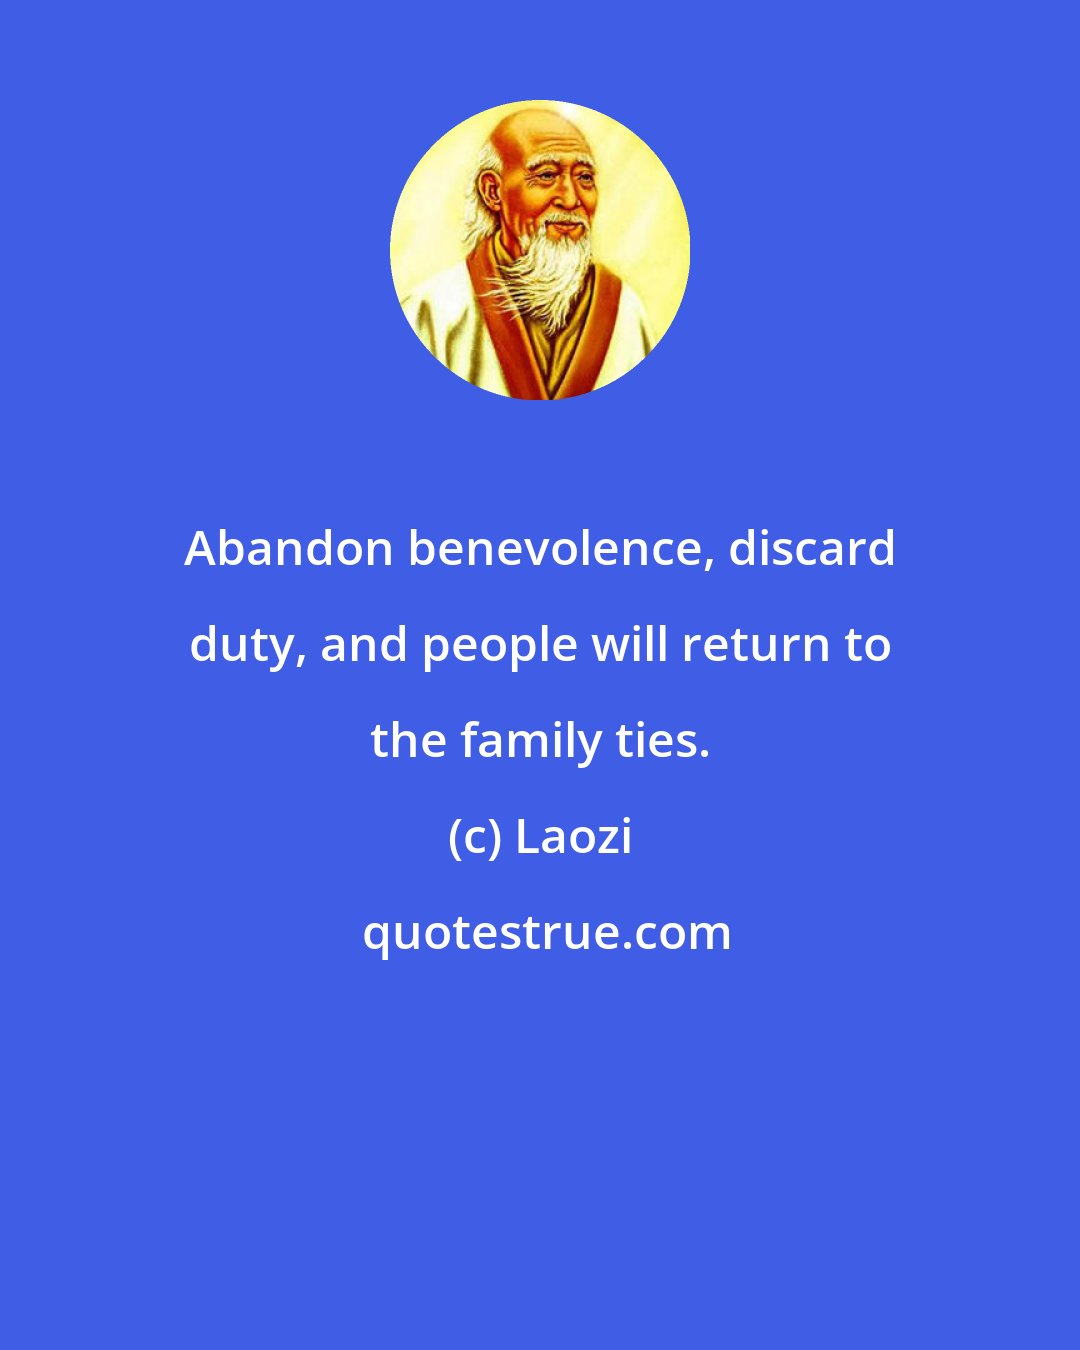 Laozi: Abandon benevolence, discard duty, and people will return to the family ties.